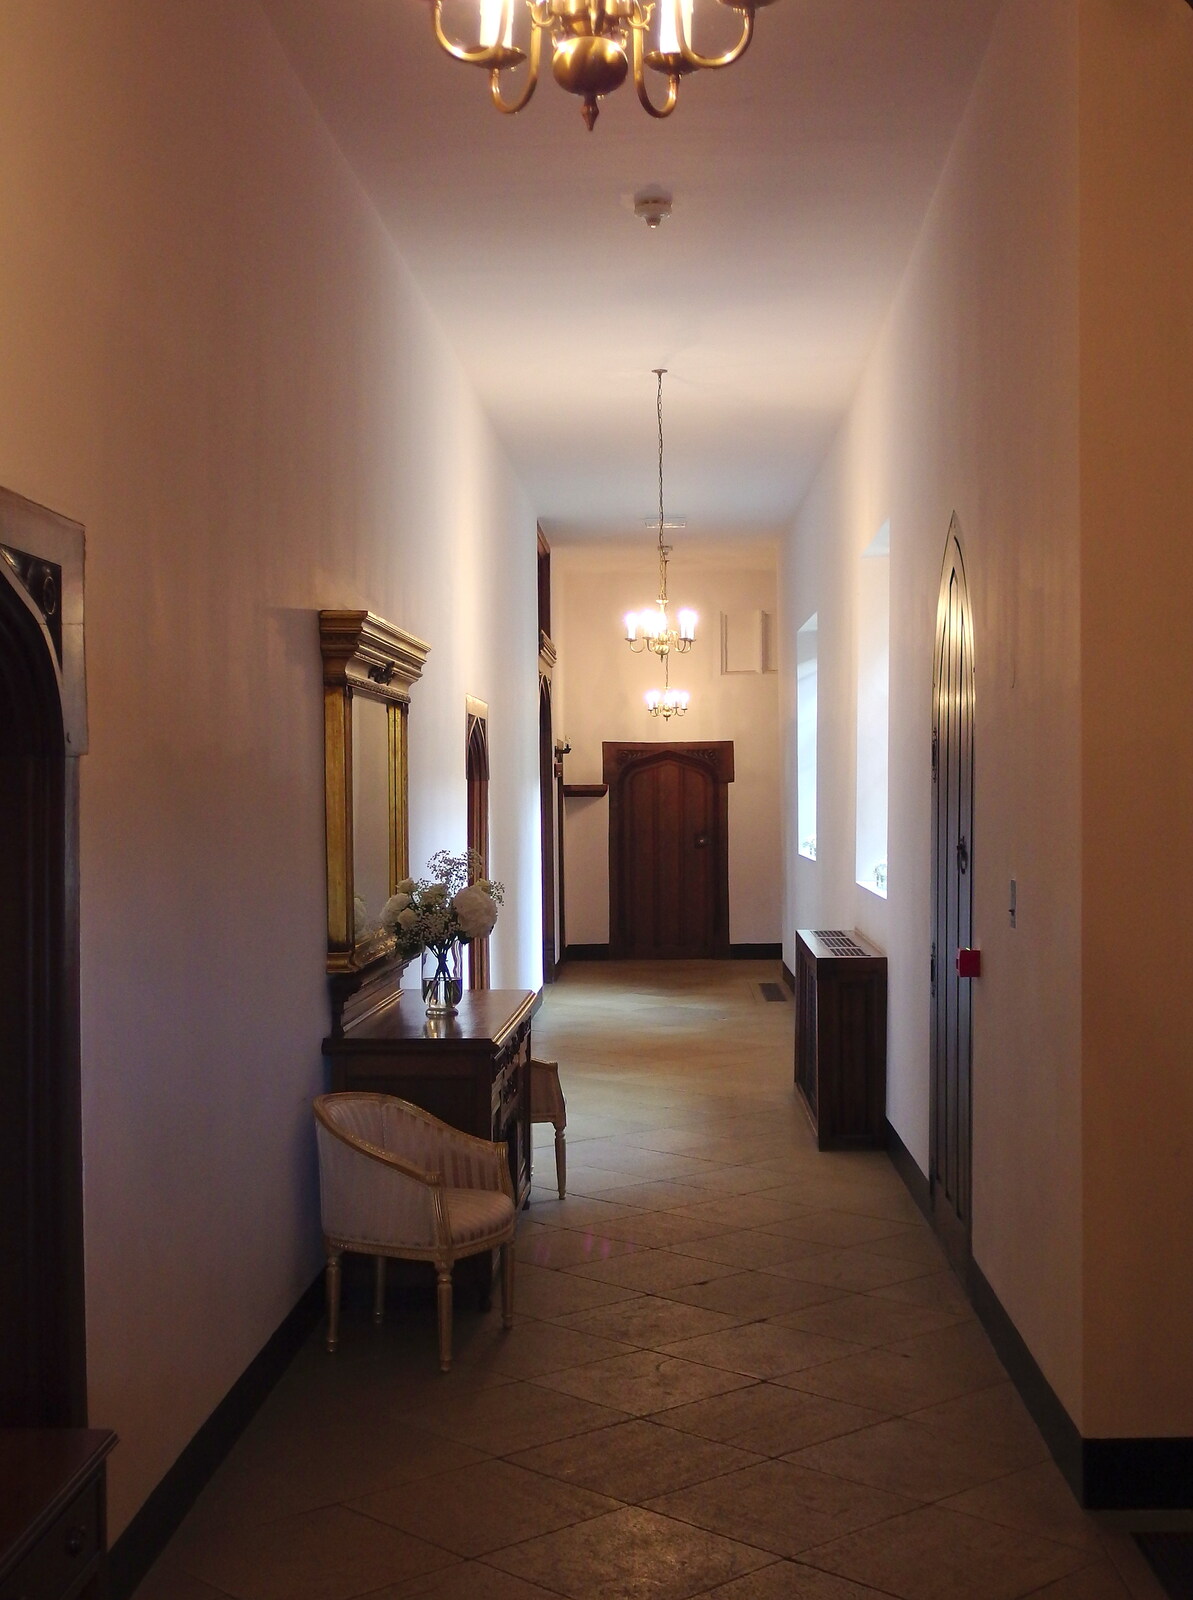 The corridors of HEngrave Hall from The BBs at Hengrave Hall, Hengrave, Suffolk - 18th August 2013